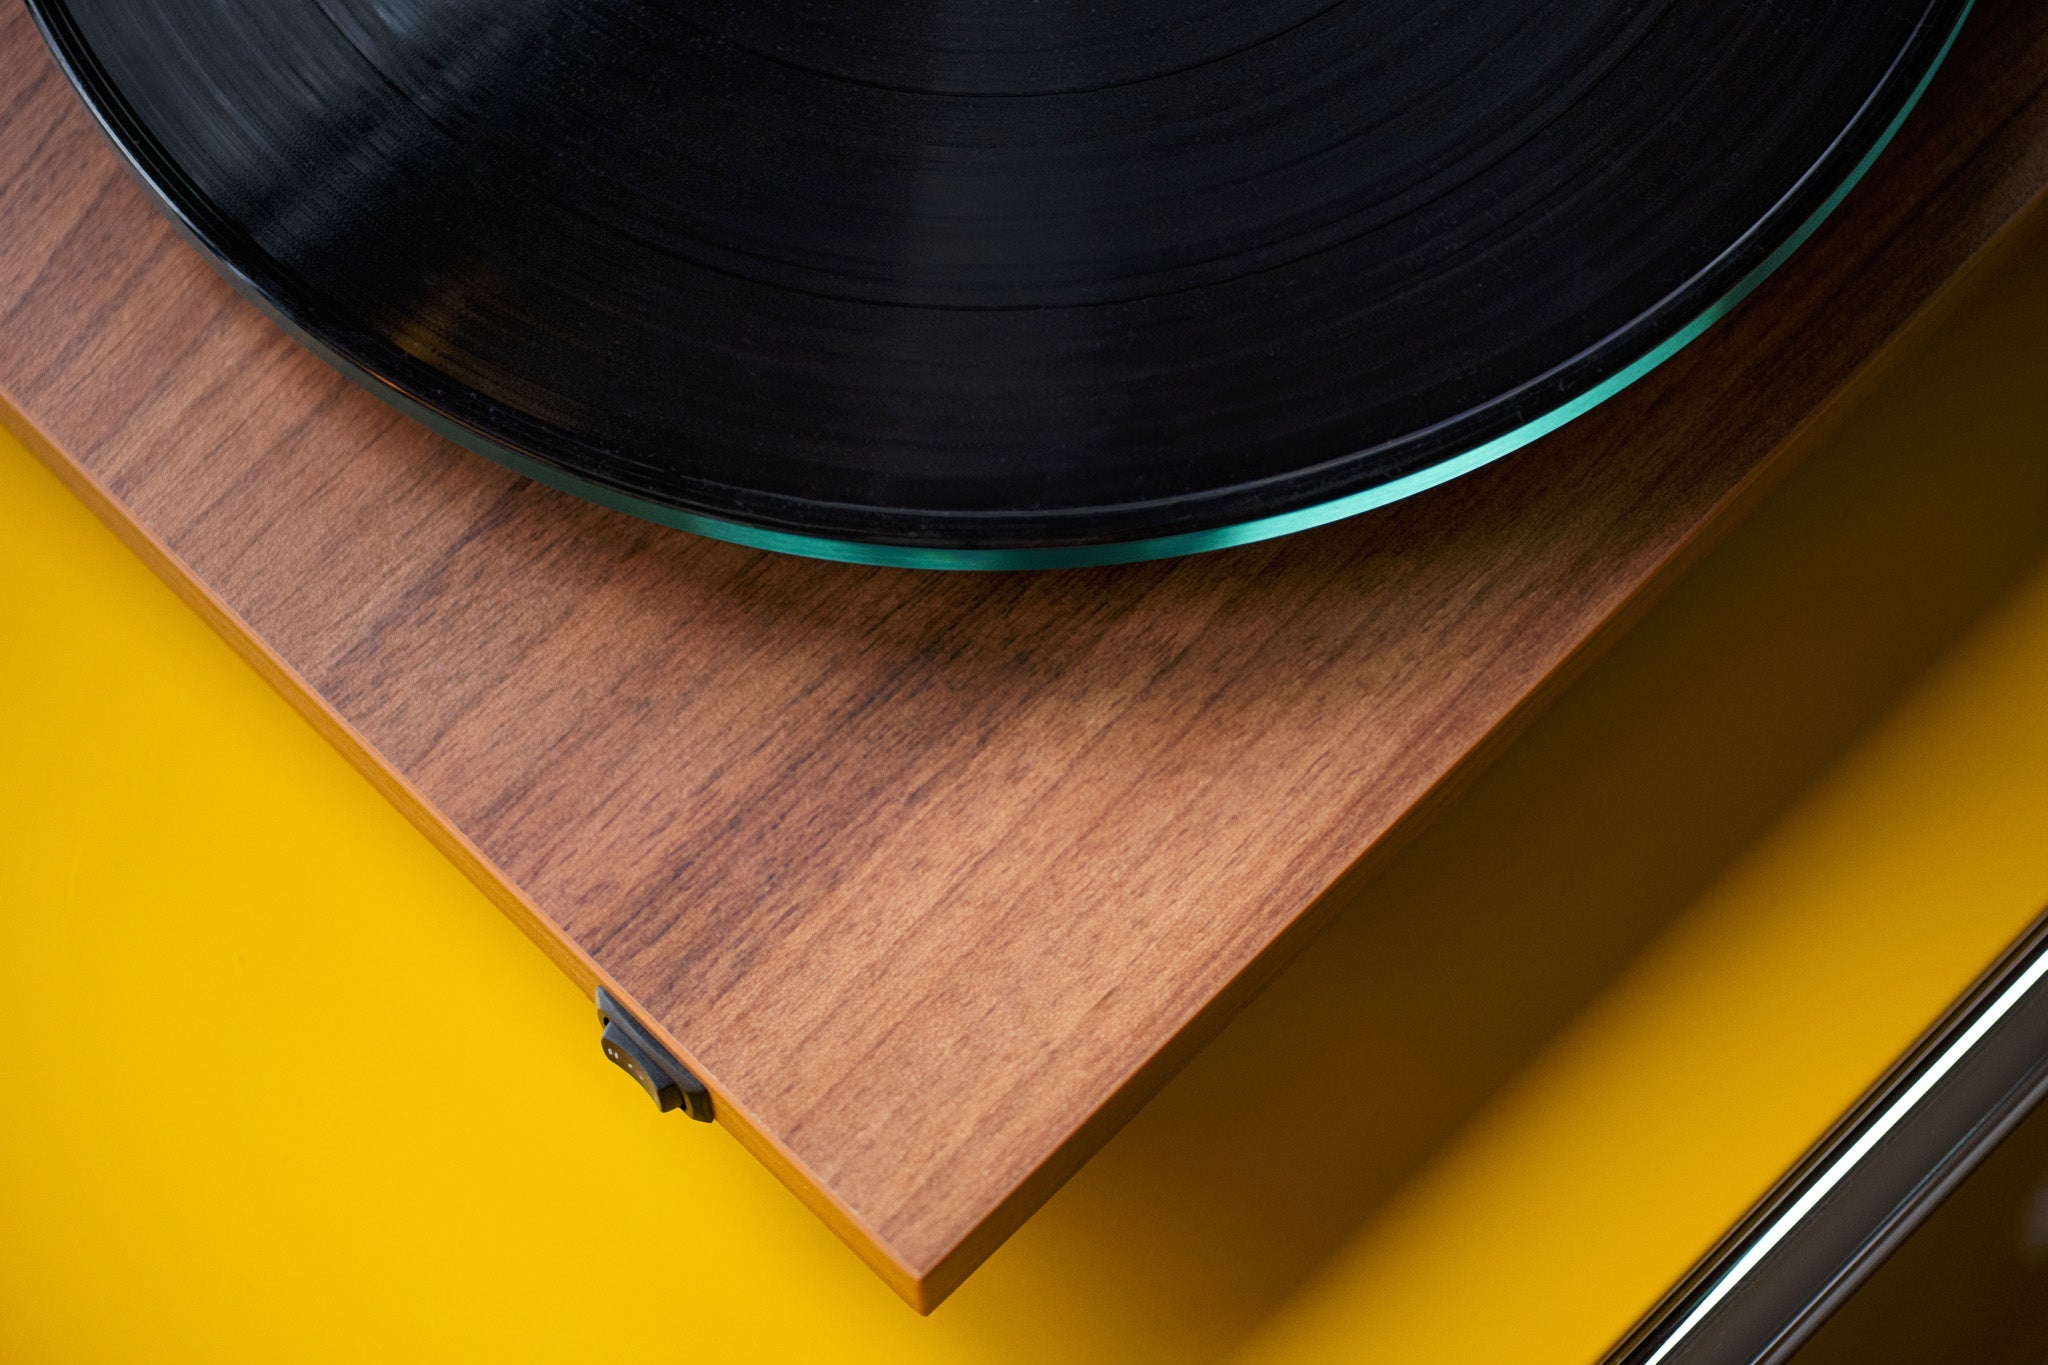 Pro-Ject T2 turntable